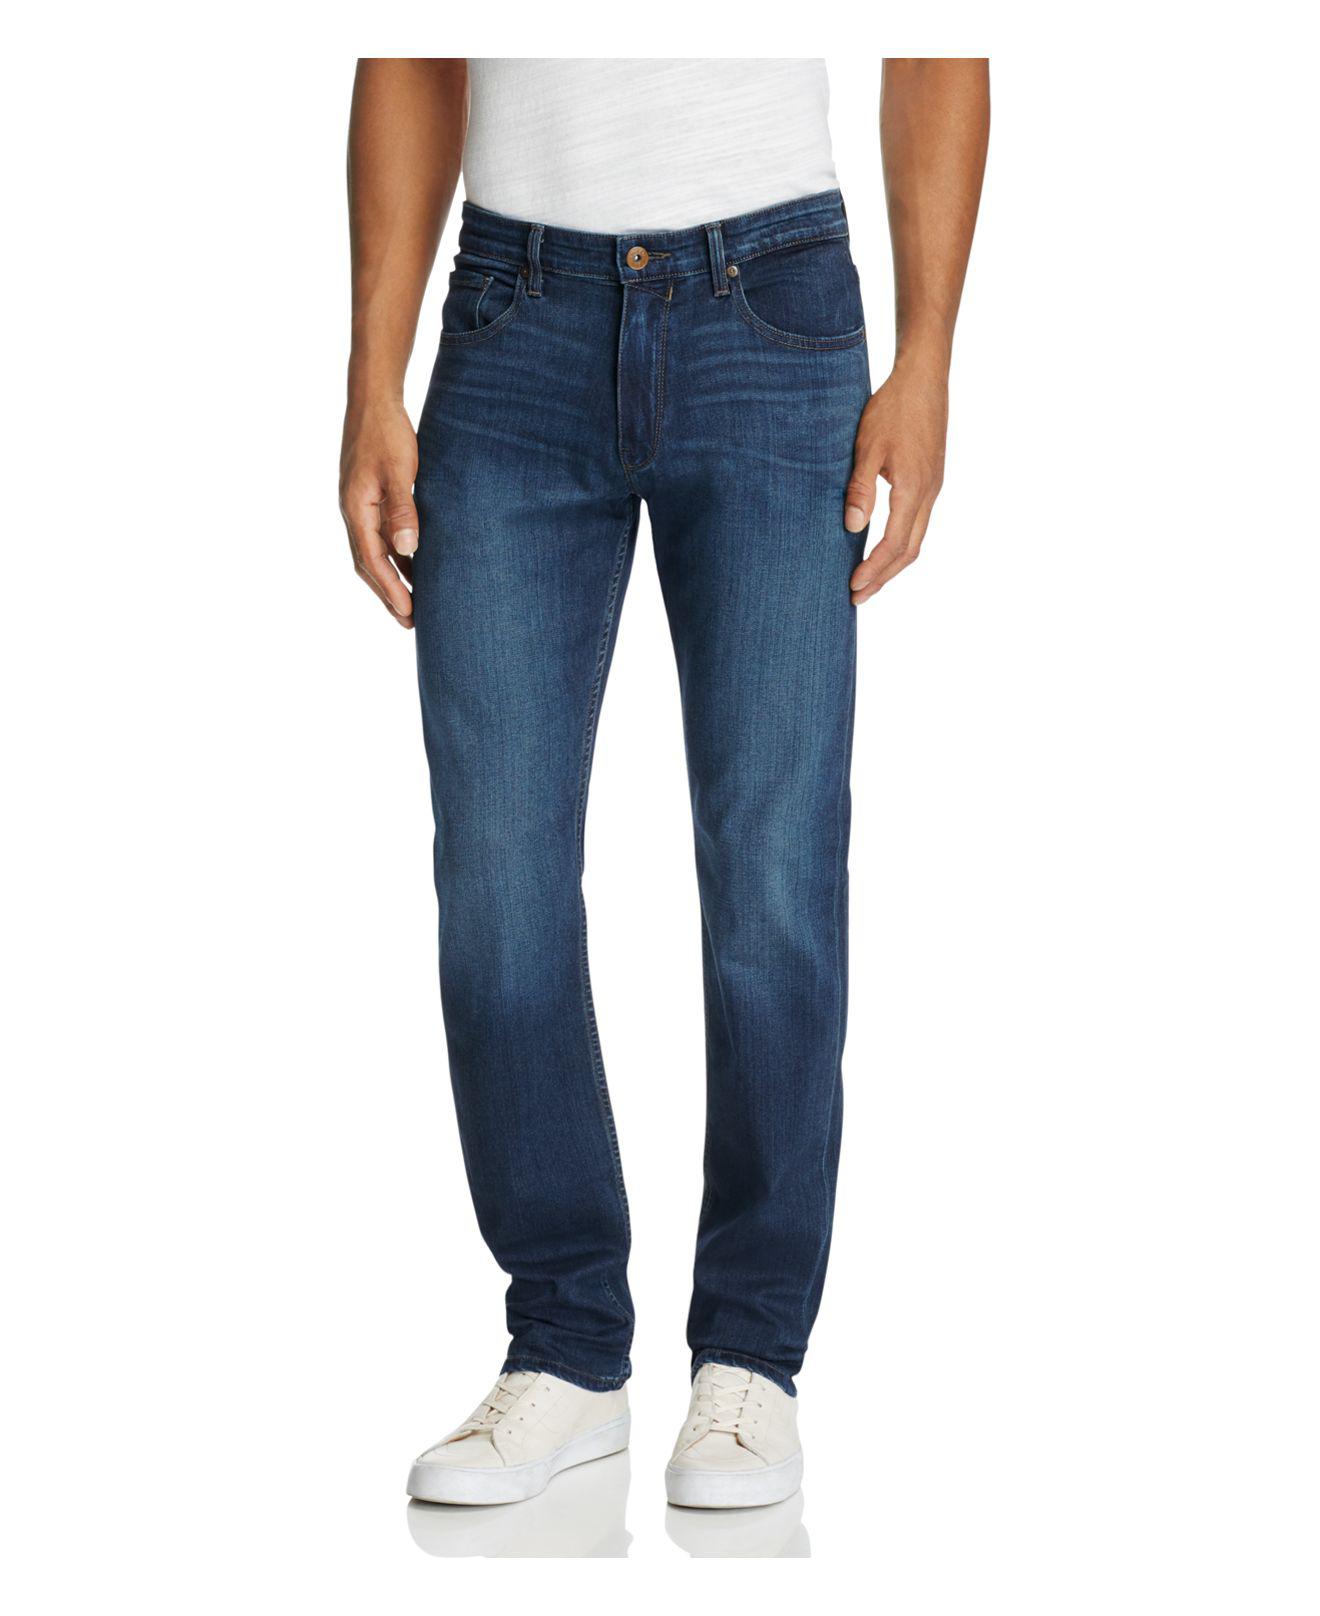 Lyst - Paige Transcend Federal Slim Fit Jeans In Blakely in Blue for Men